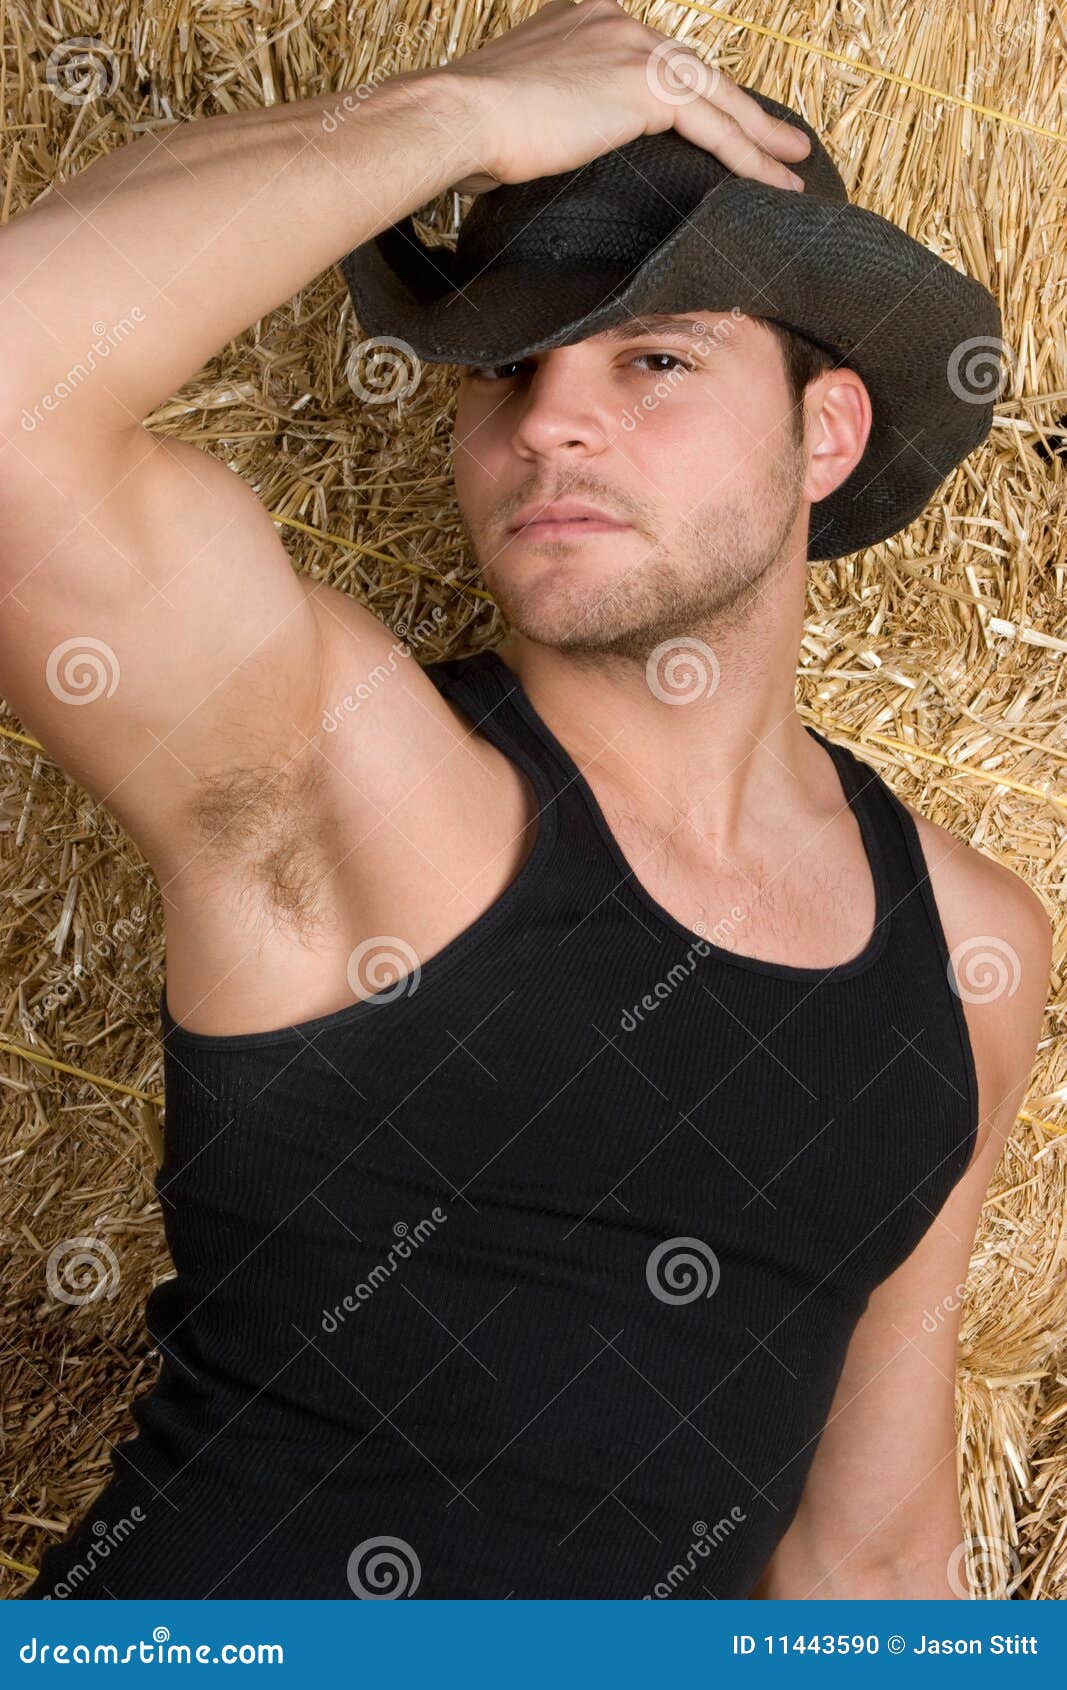 Pictures of country boys